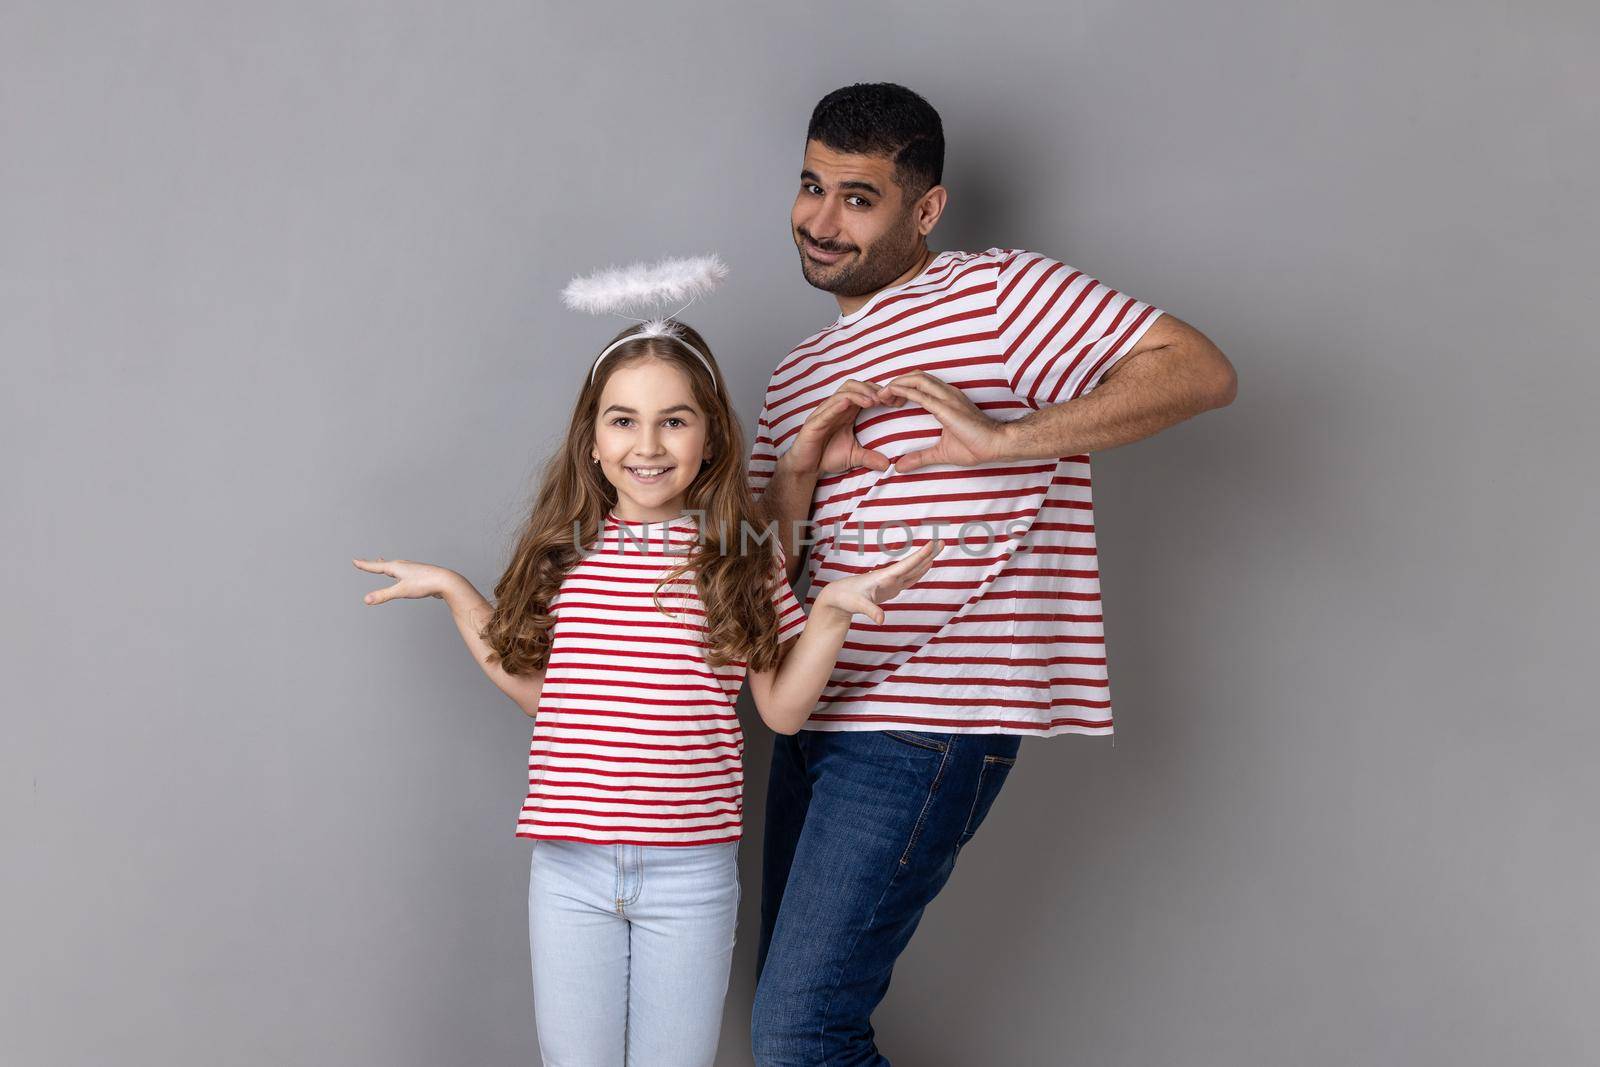 Portrait of optimistic father and daughter in striped T-shirts posing together, little girl with halo above head, man showing heart gesture with hands. Indoor studio shot isolated on gray background.